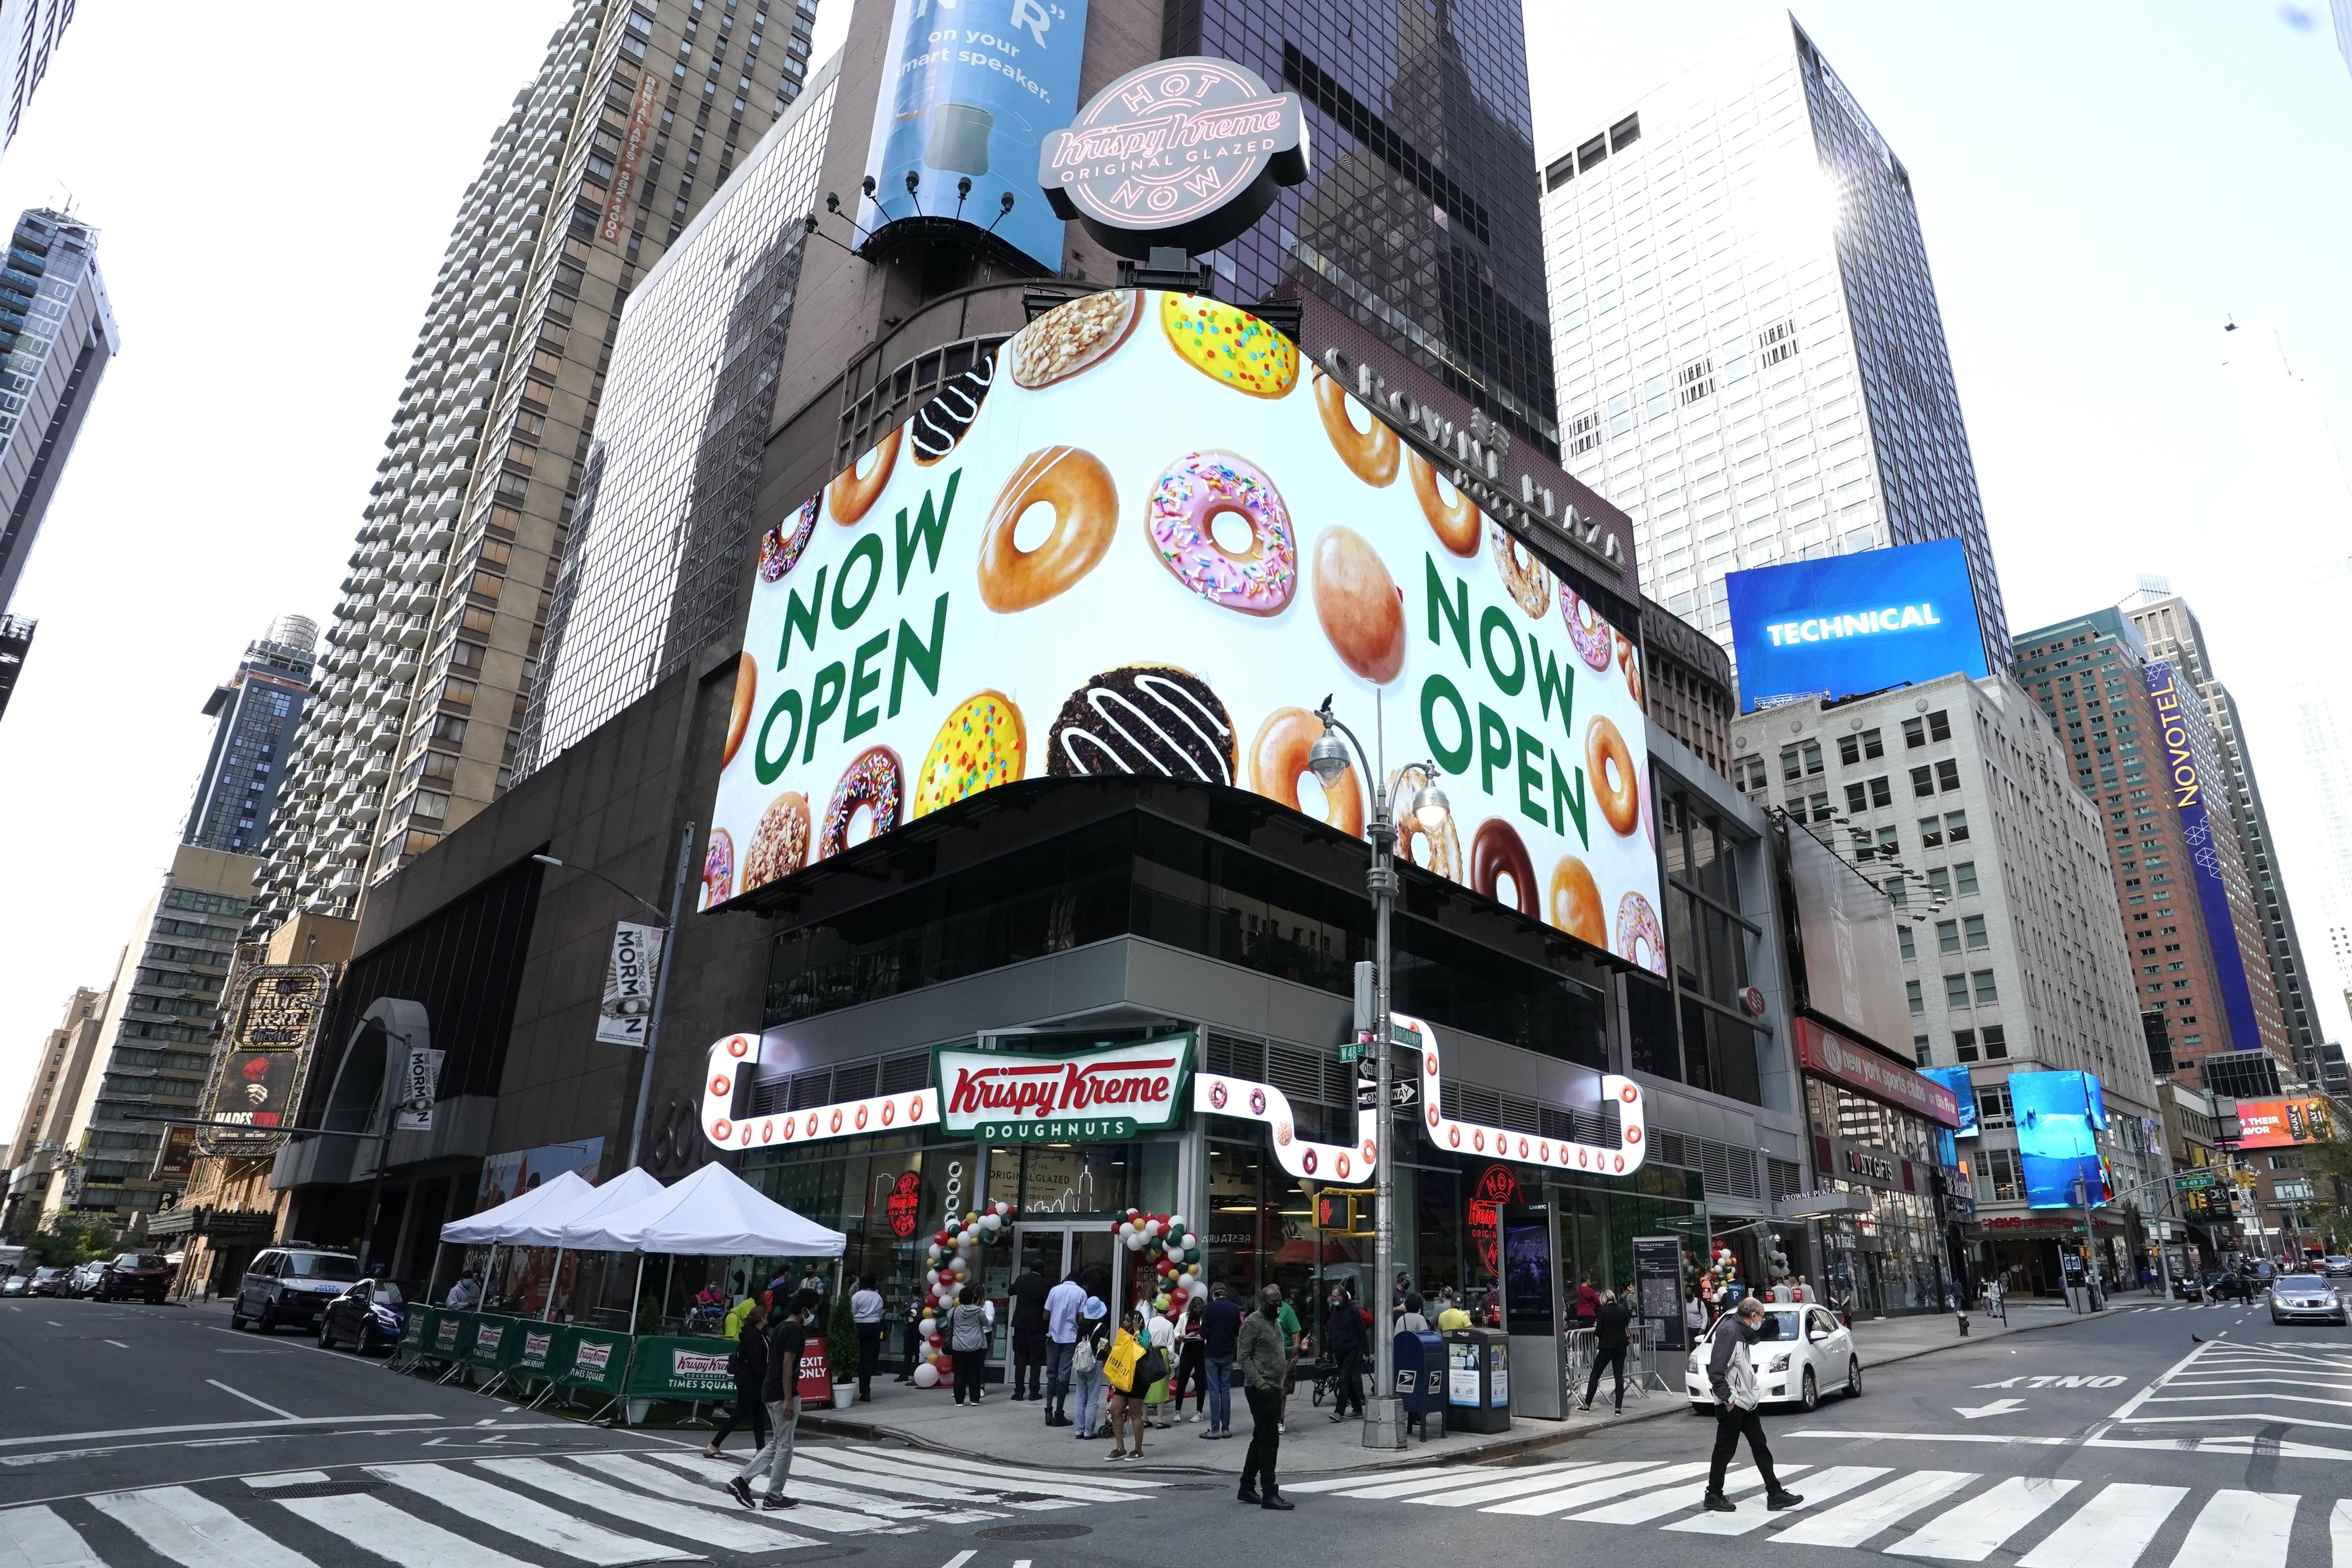 Outside view of the new Krispy Kreme flagship store amid the coronavirus pandemic in Times Square, New York, September 15, 2020. - The 4,500 square-foot donut shop includes a glaze waterfall, a 24-hour street pick-up window, and a system that can make more than 4,500 donuts an hour. (Photo by TIMOTHY A. CLARY / AFP) (Photo by TIMOTHY A. CLARY/AFP via Getty Images)